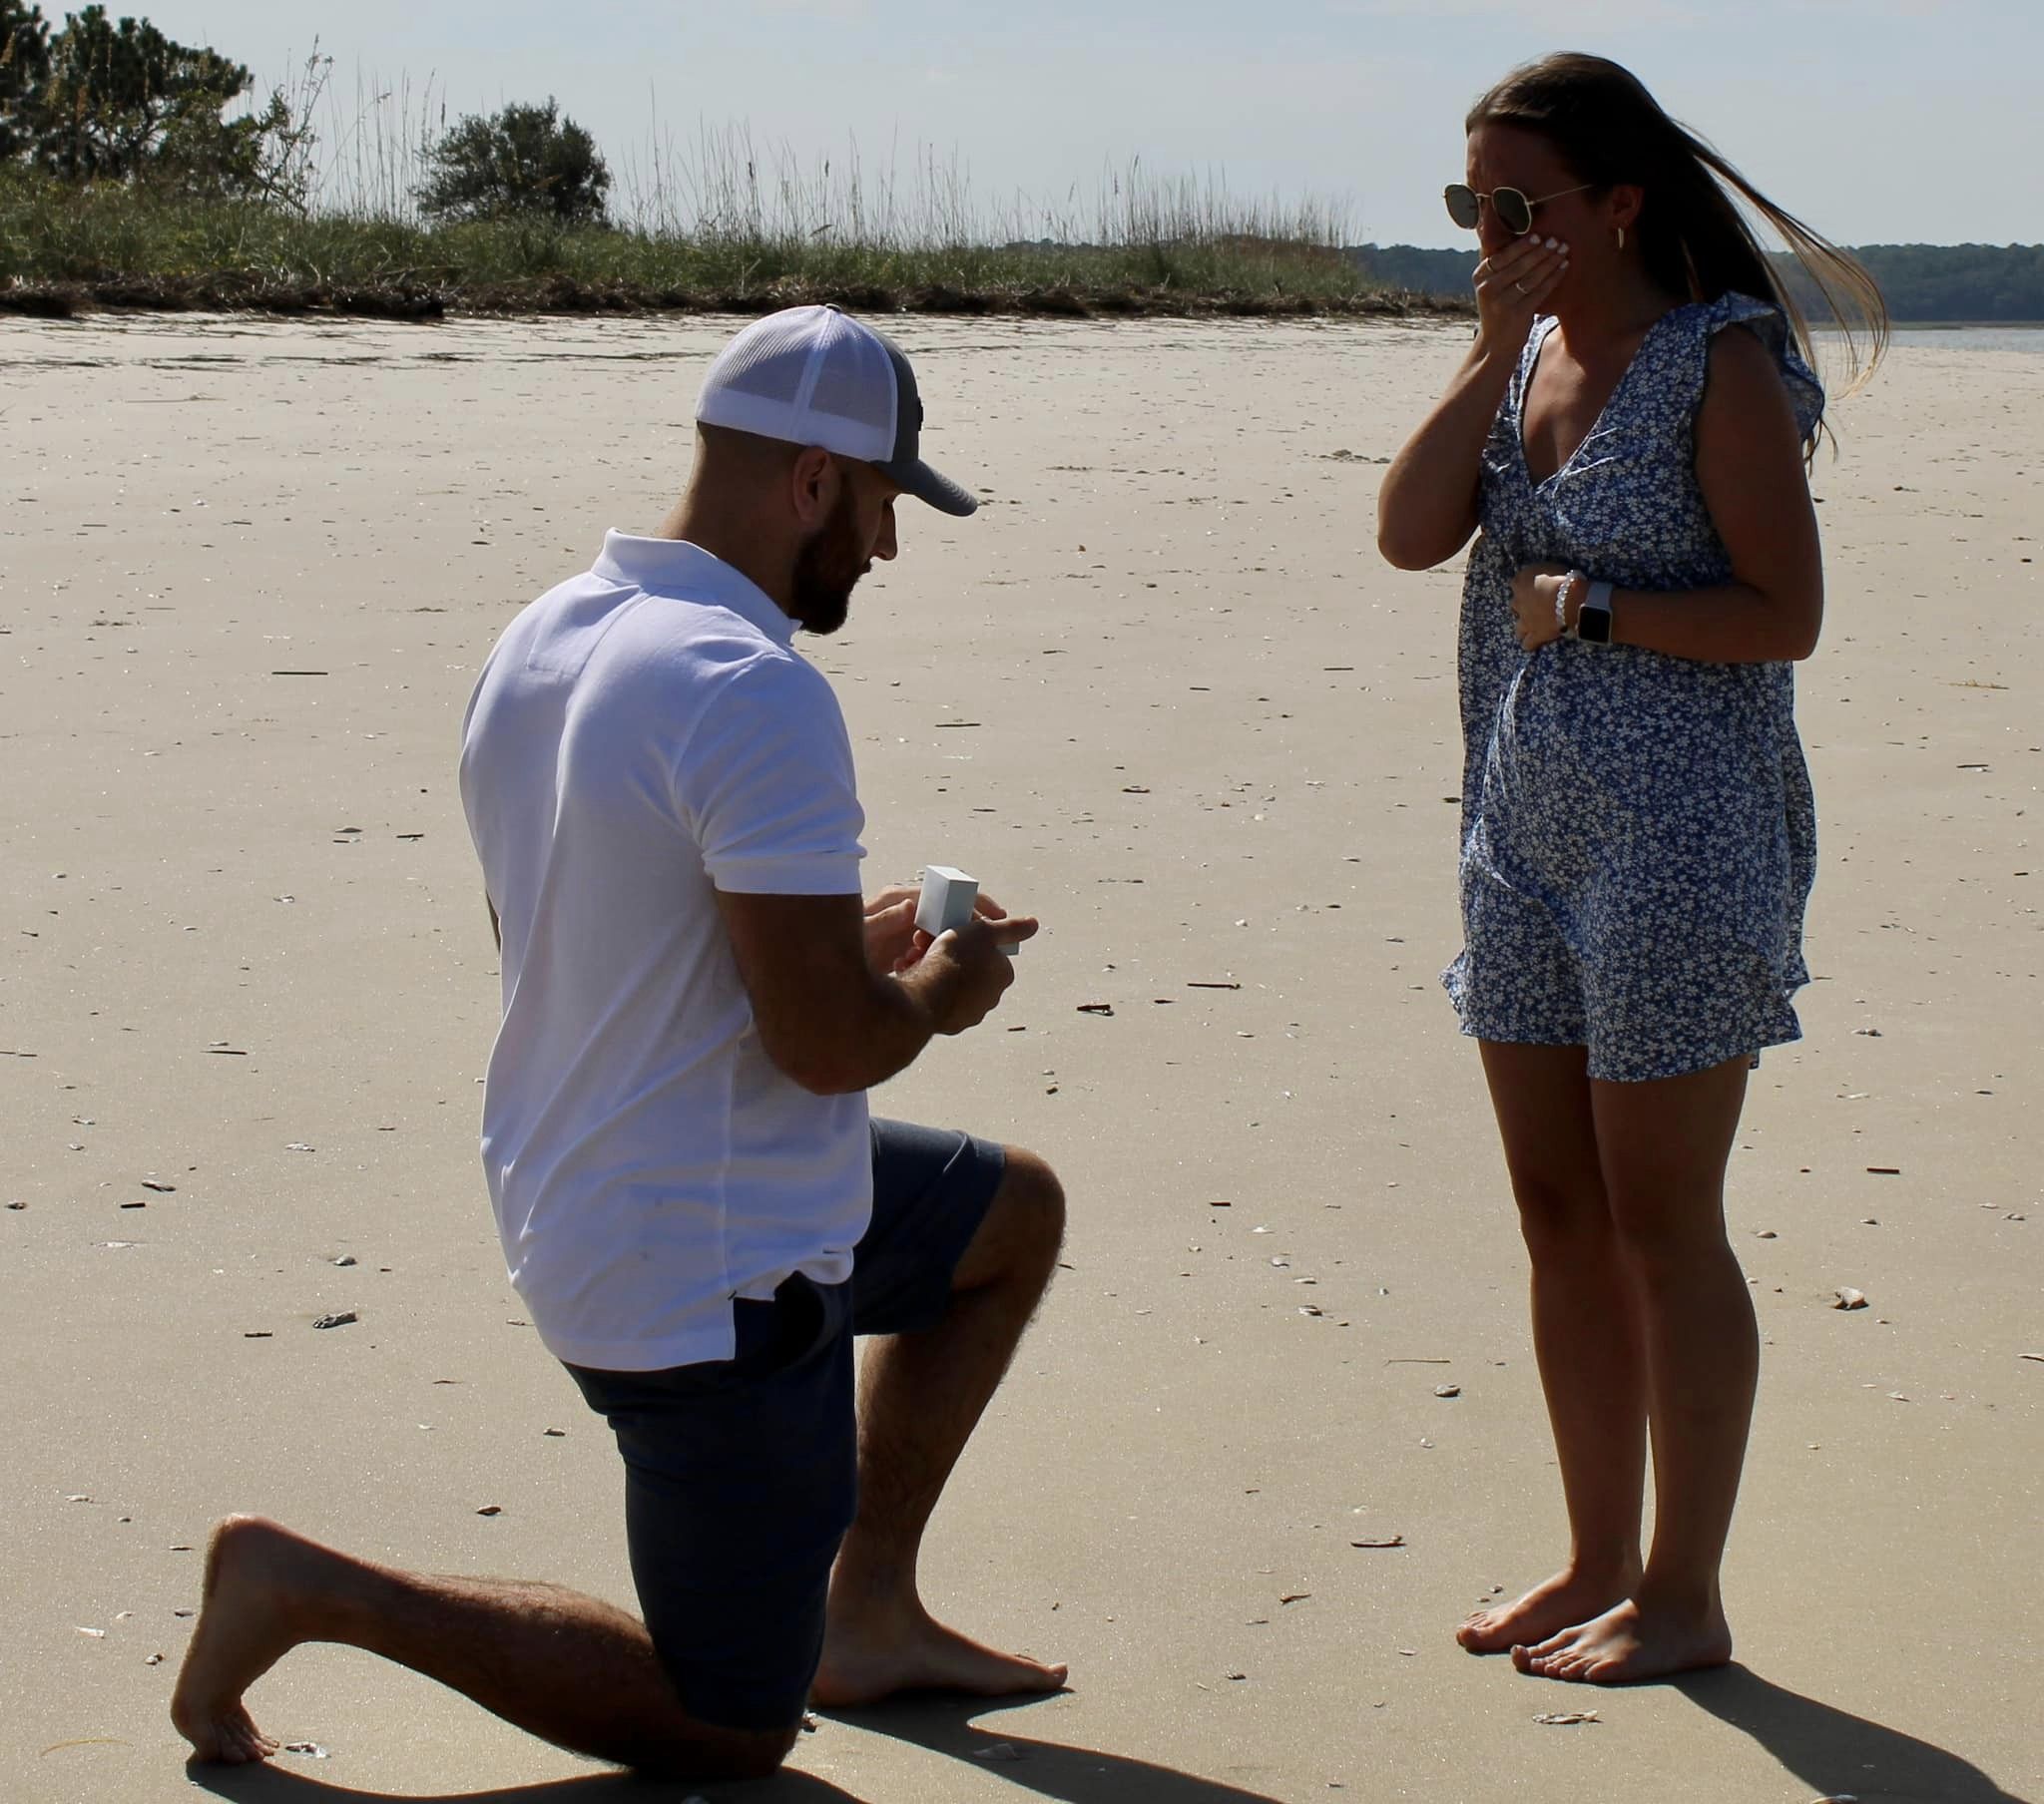 Things to do in Hilton Head - Propose!